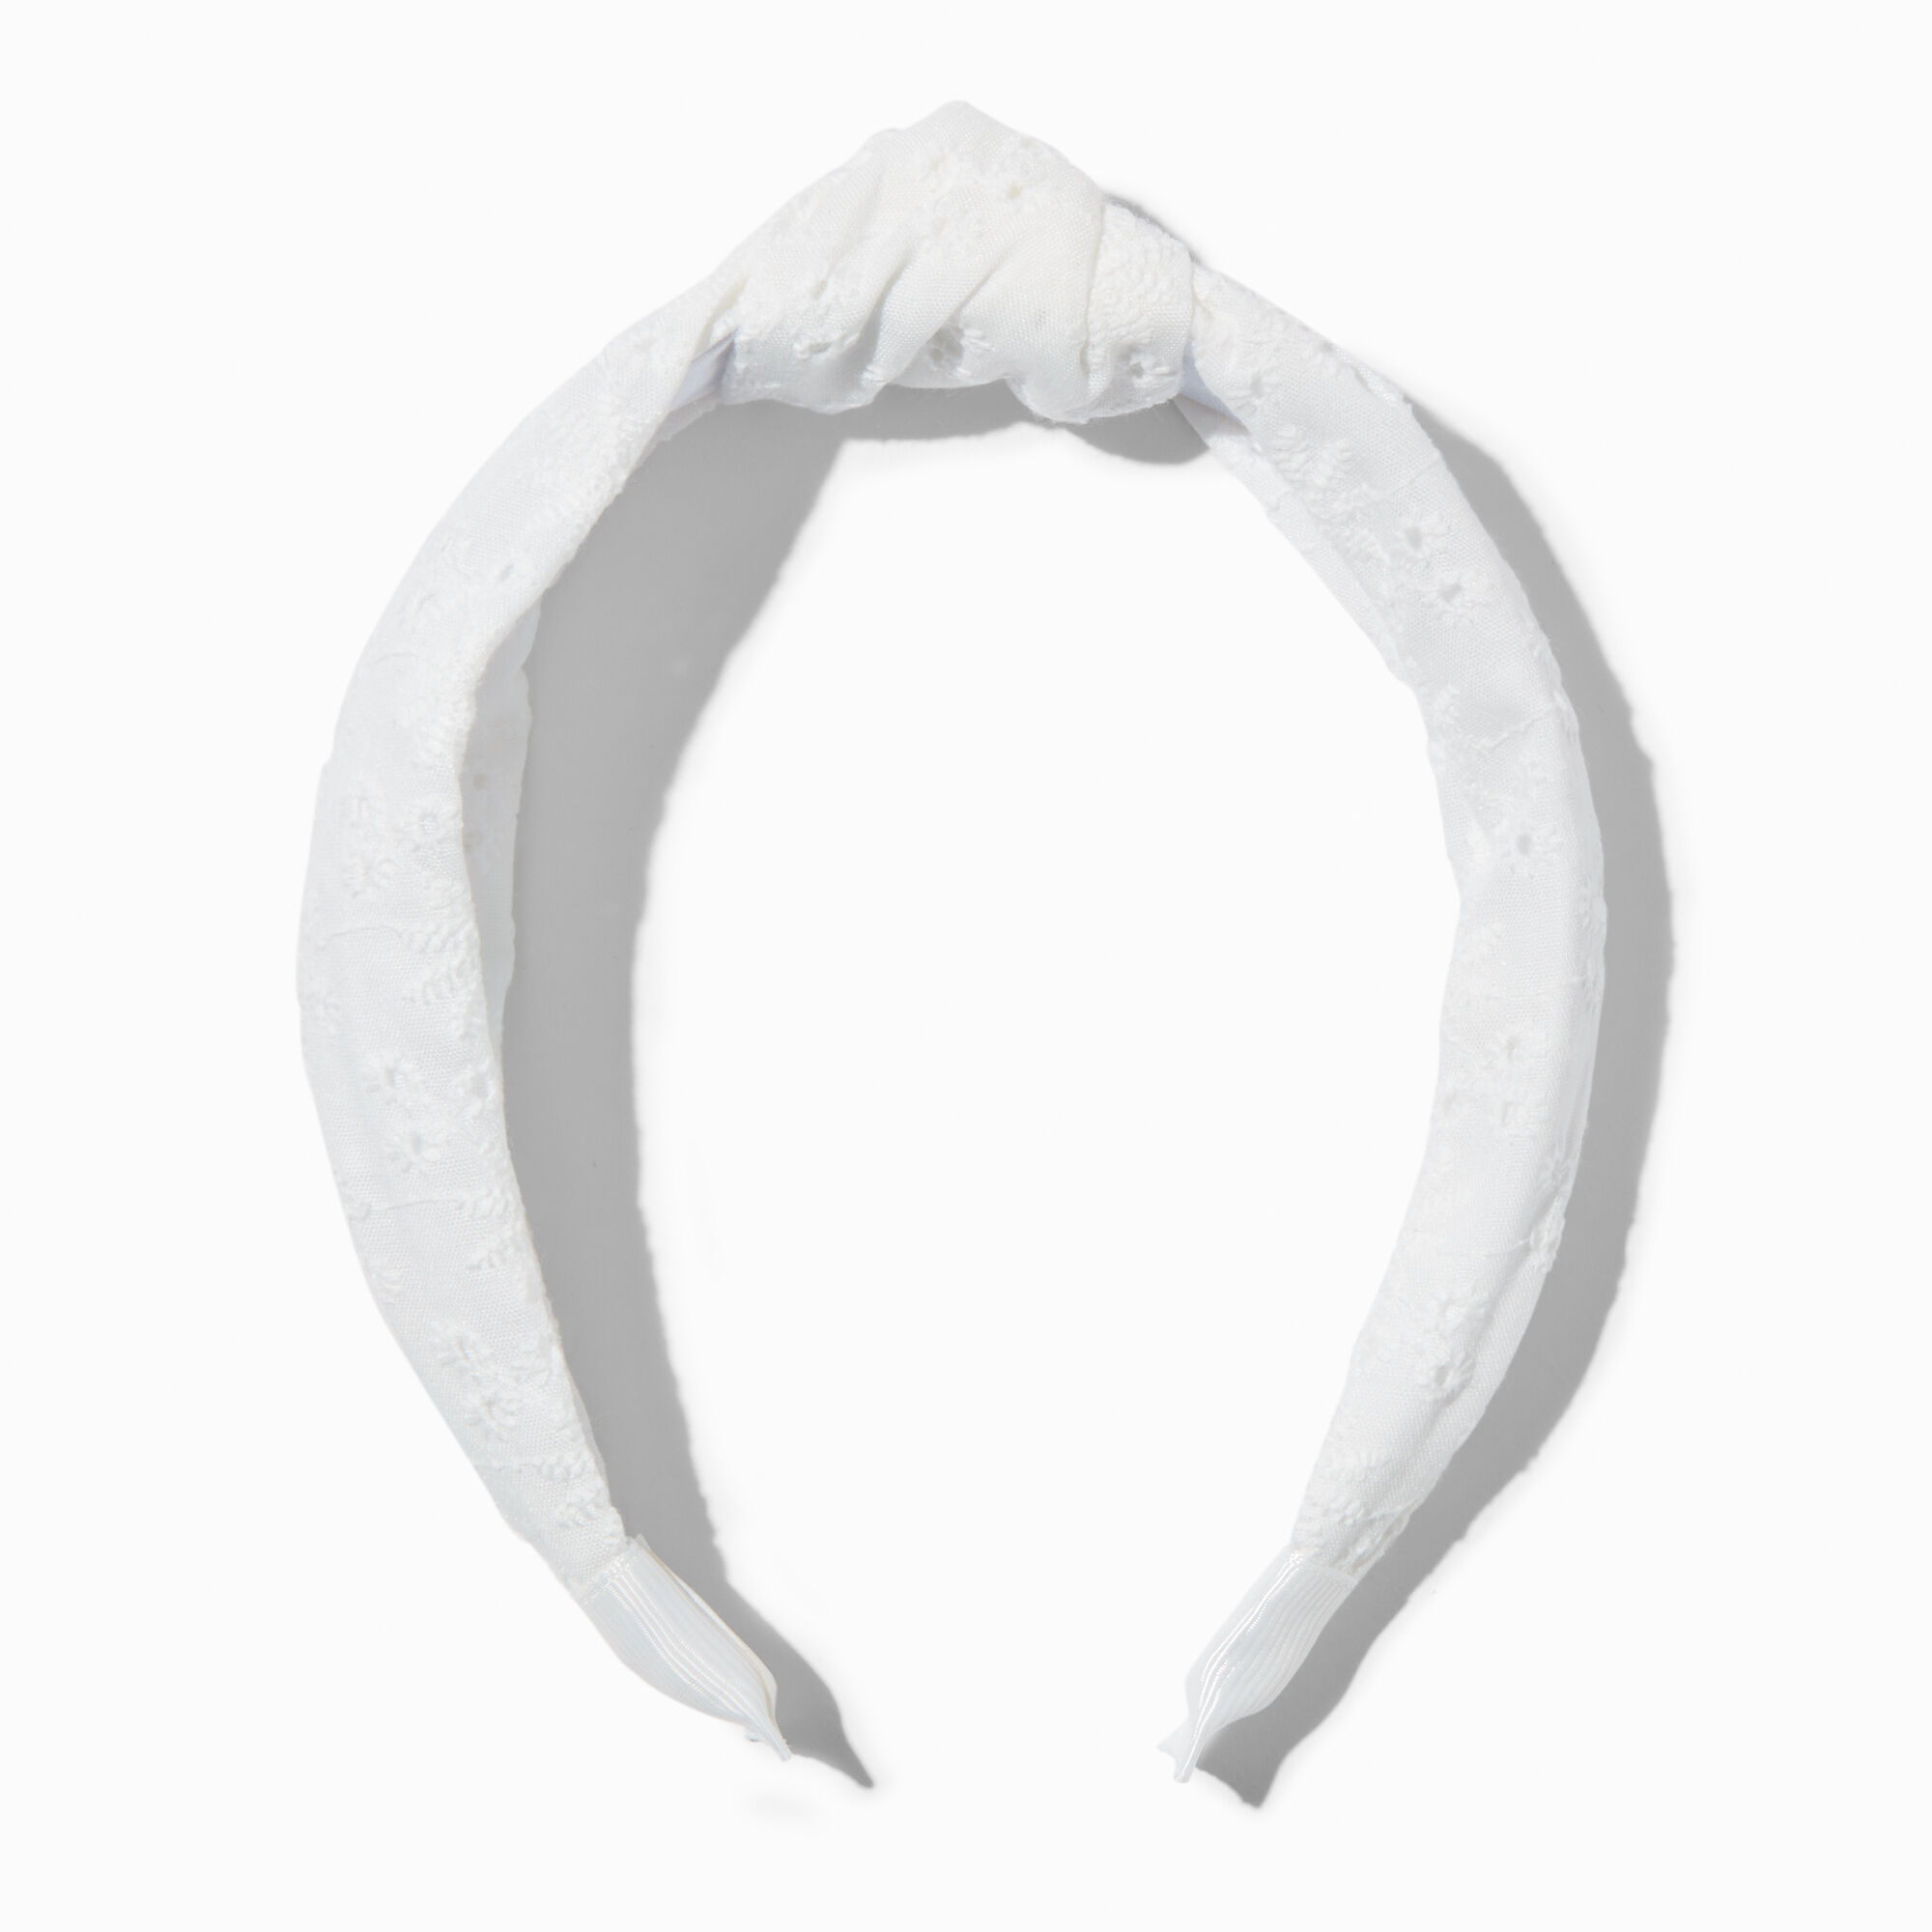 View Claires Club Eyelet Knotted Bow Headband White information